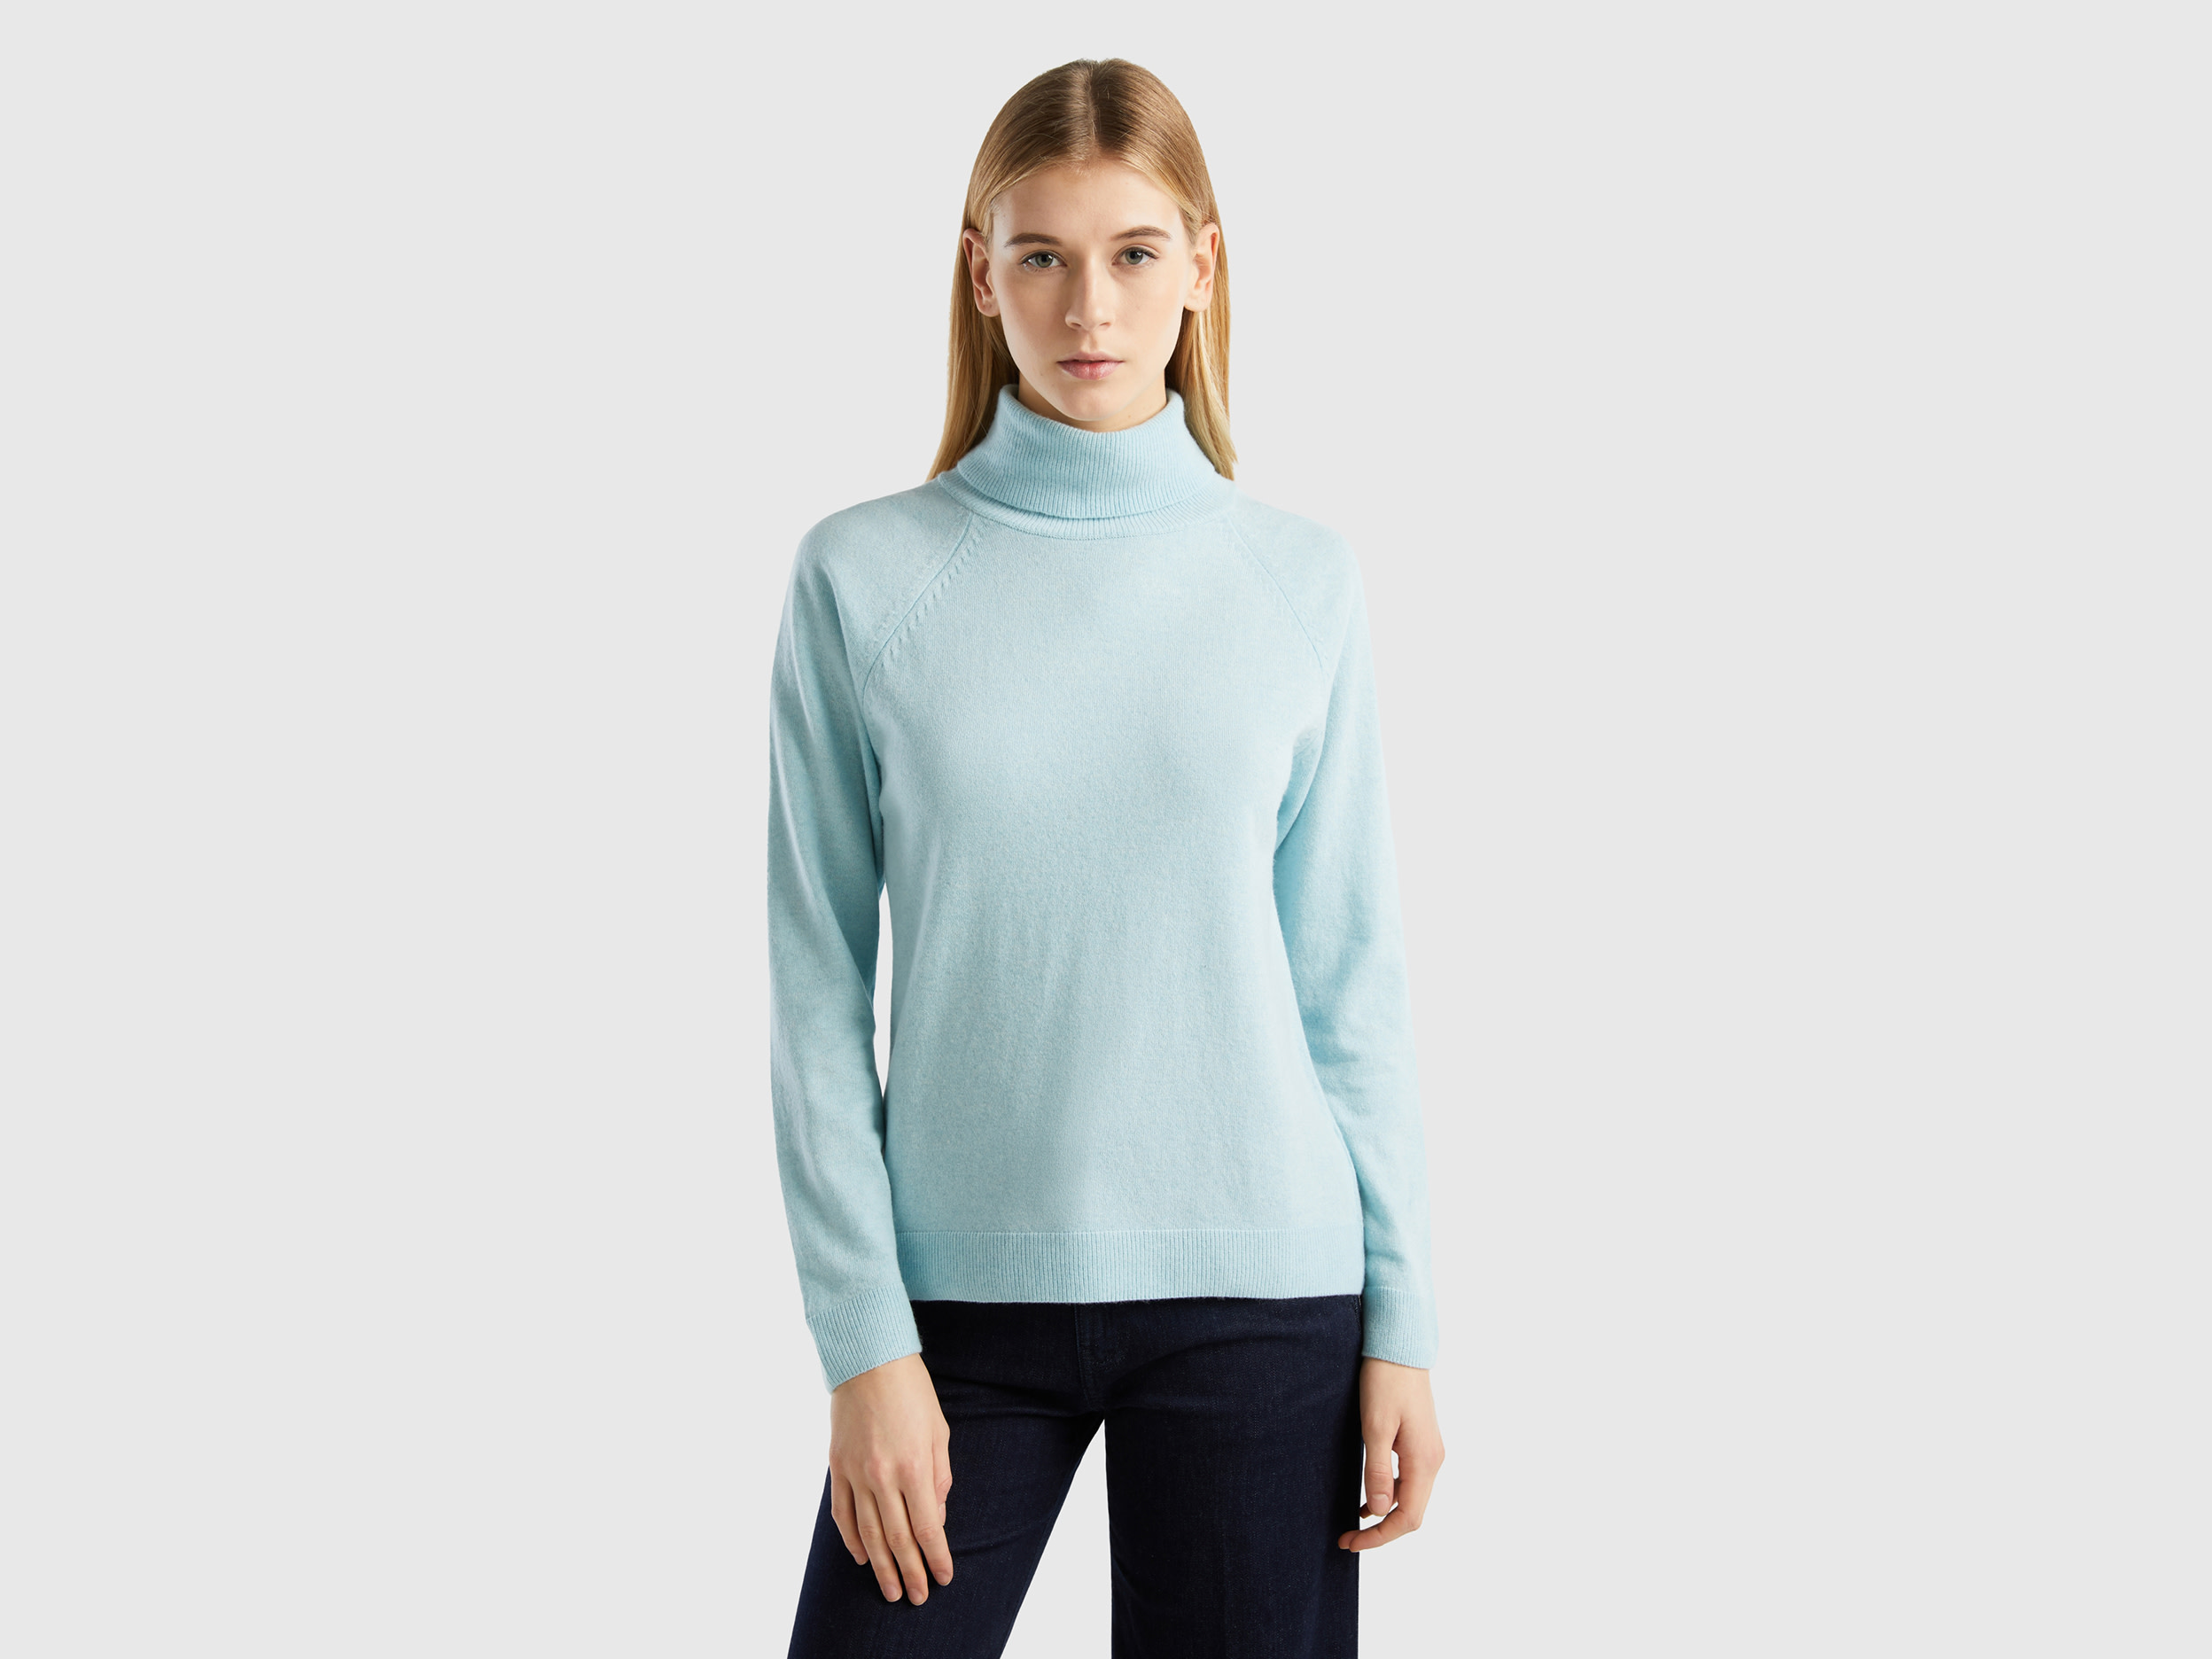 Benetton, Light Gray Turtleneck Sweater In Cashmere And Wool Blend, size S, Light Gray, Women